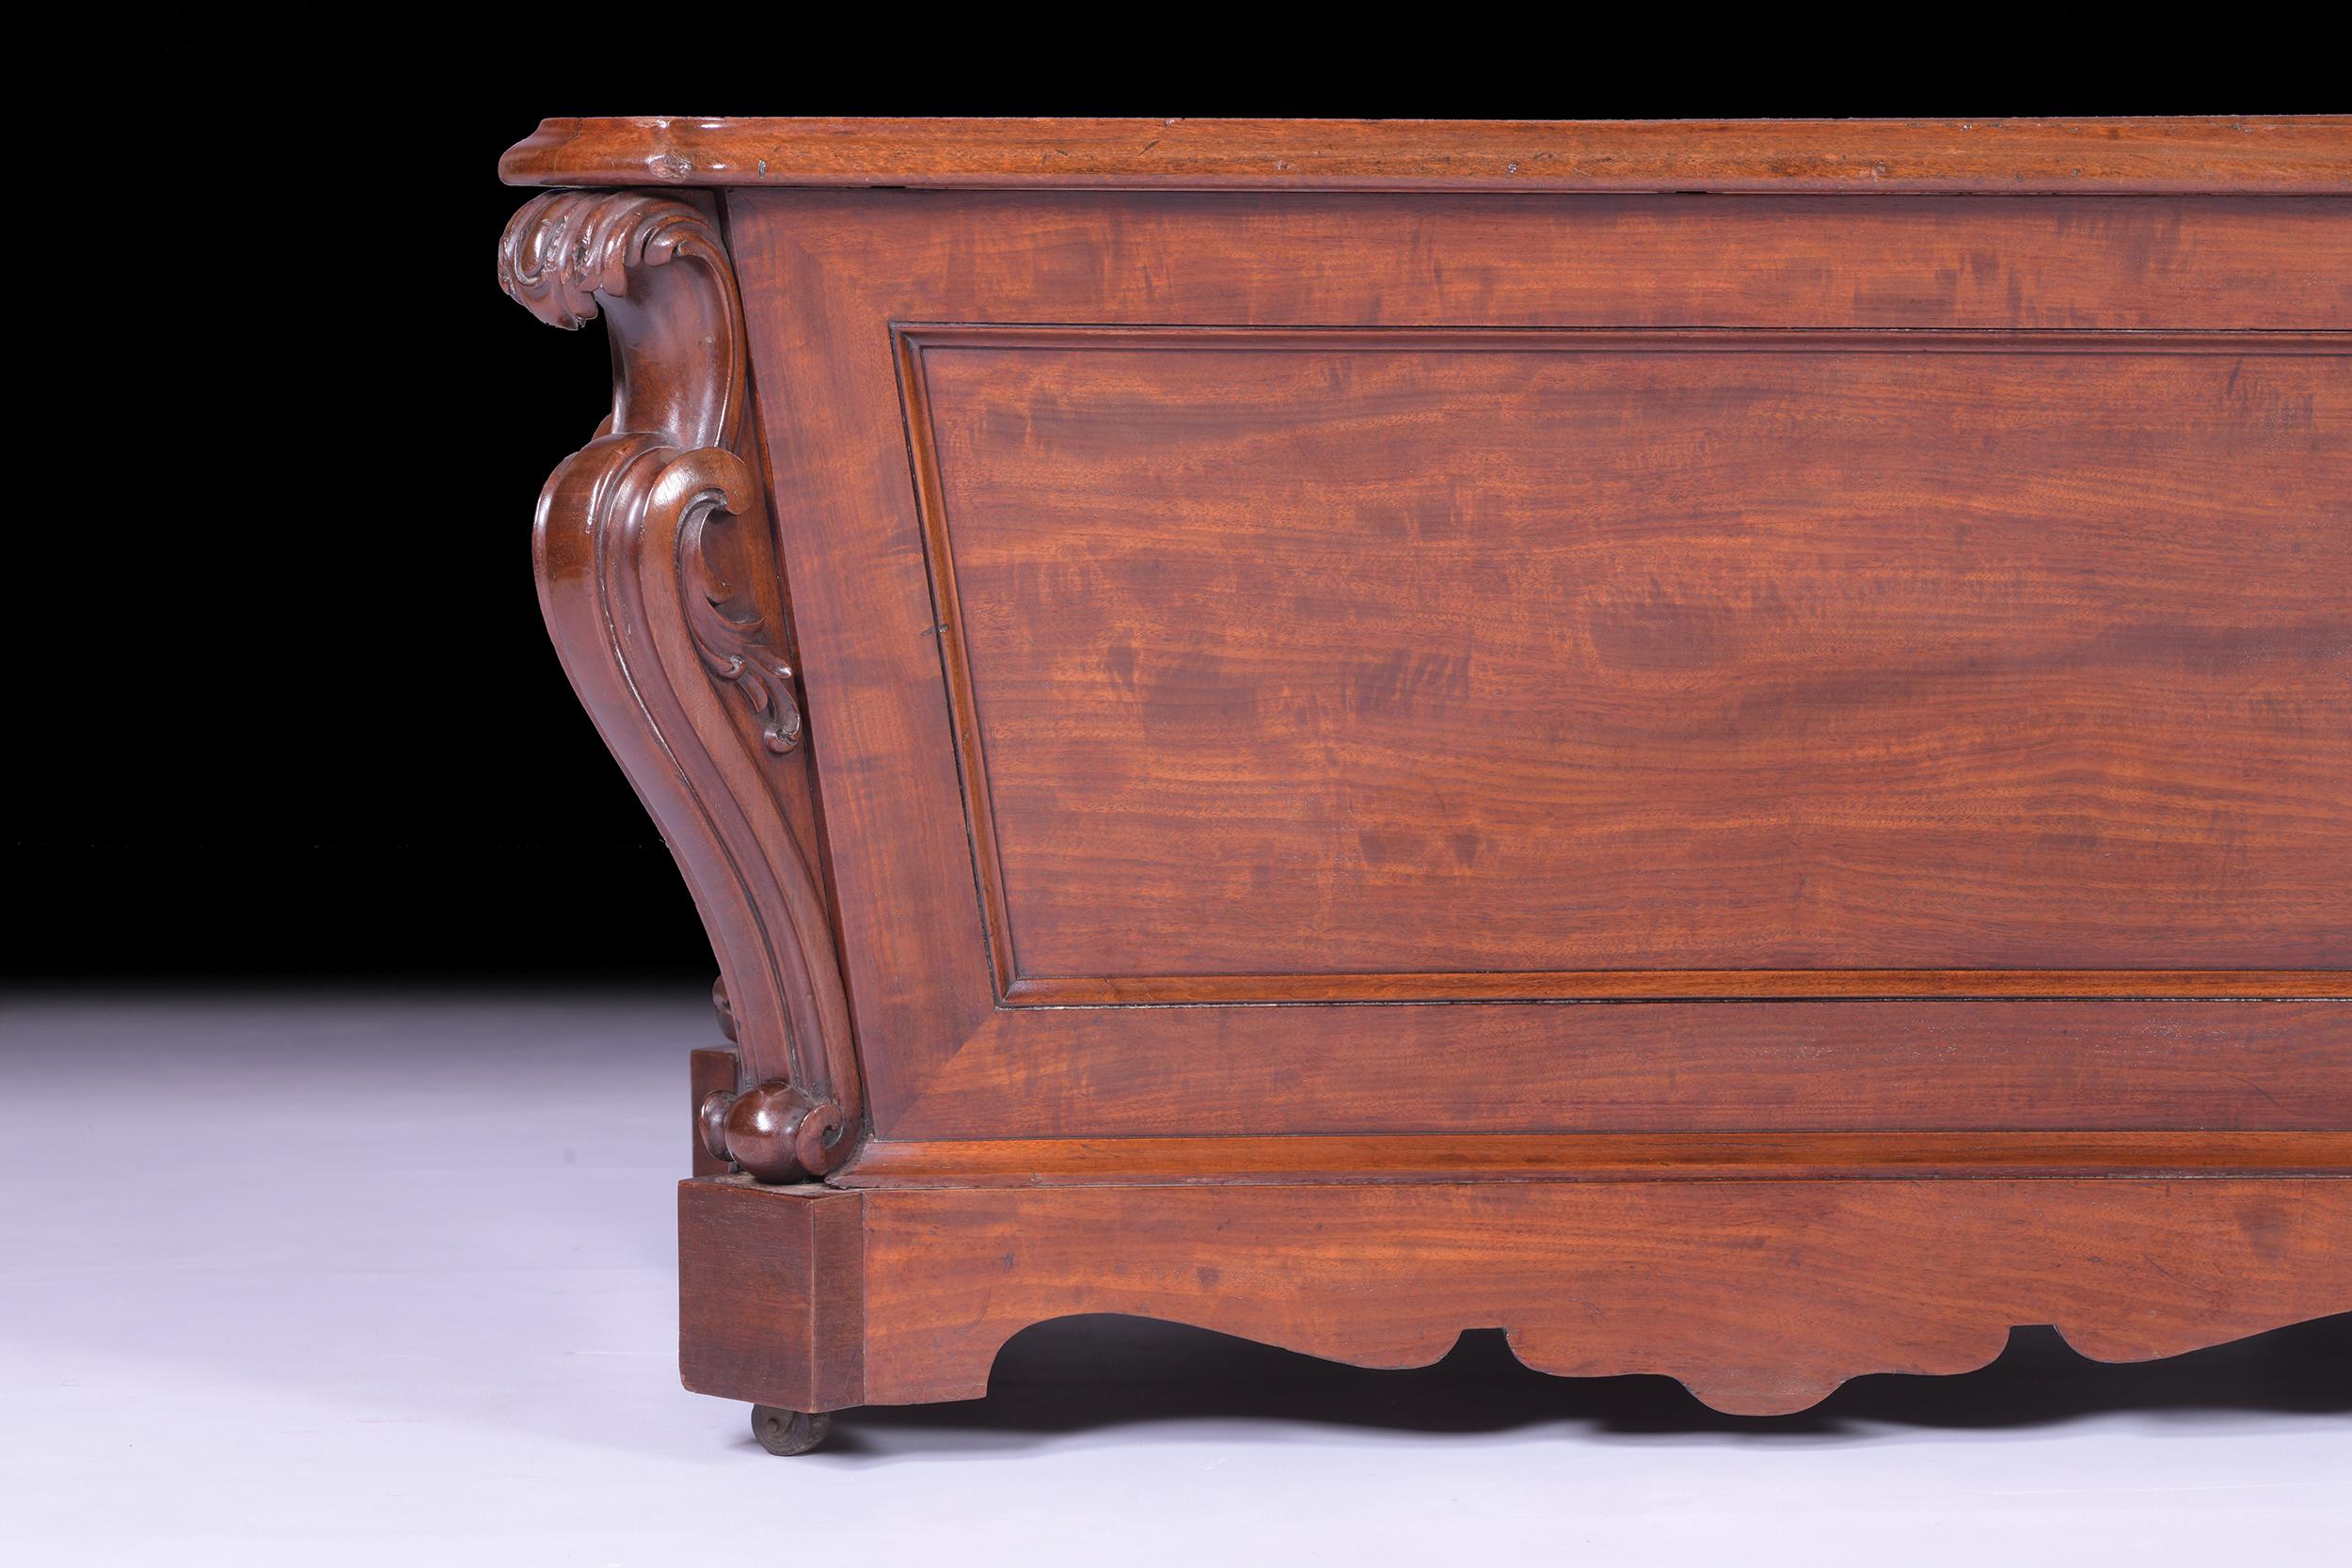 19th Century English Regency Mahogany Open Cellarette Attributed to Gillows For Sale 3